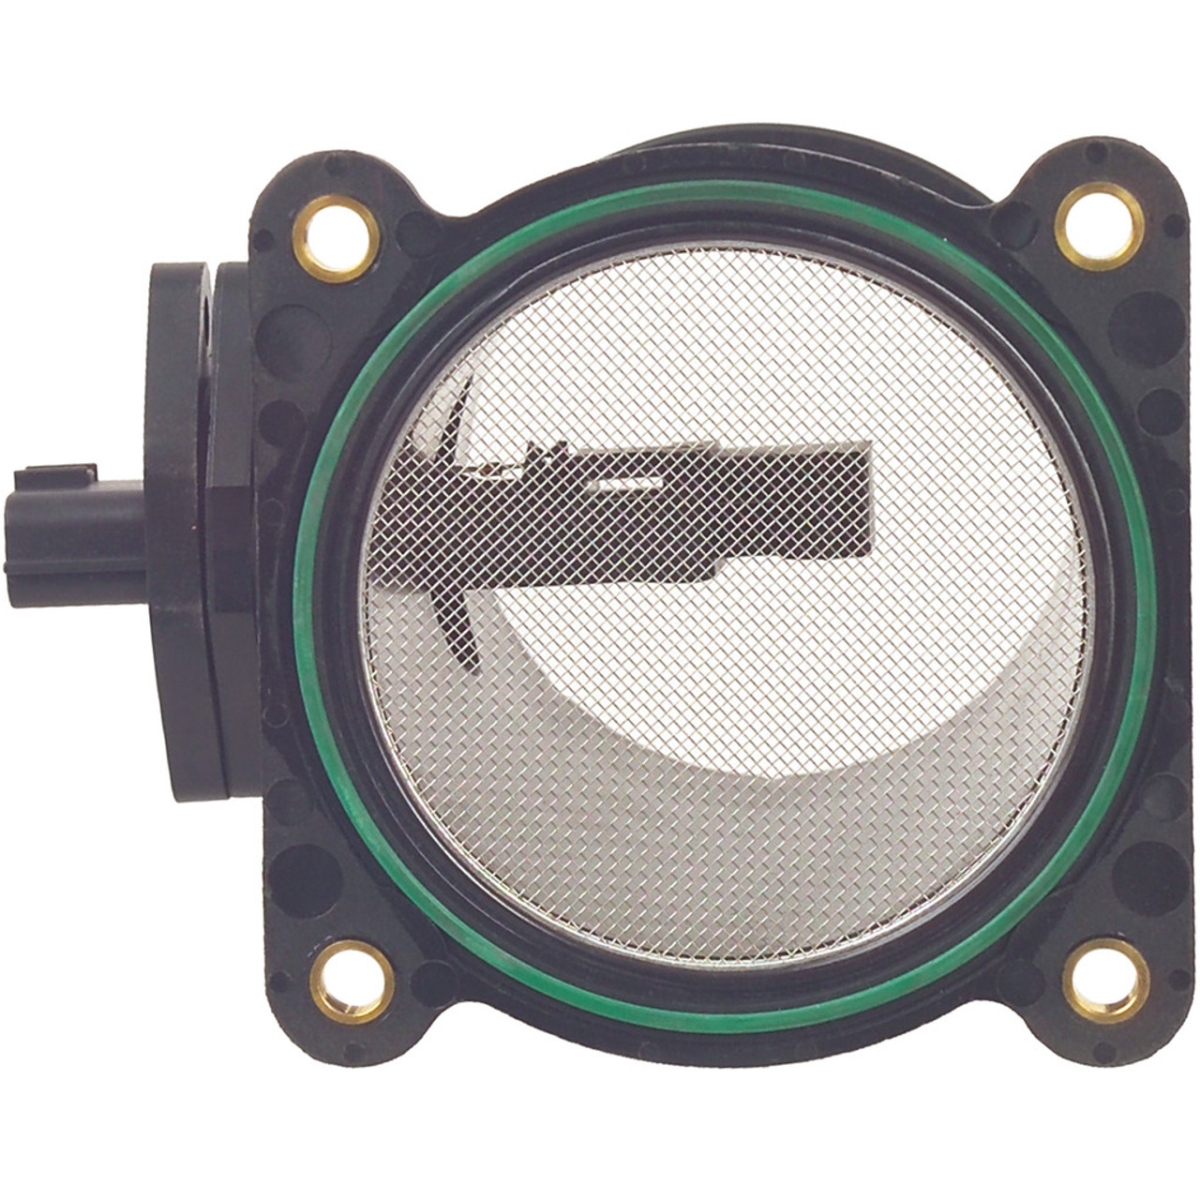 Picture of A1 Cardone 86-10074 Mass Air Flow Sensor for 2002-2003 Nissan Altima